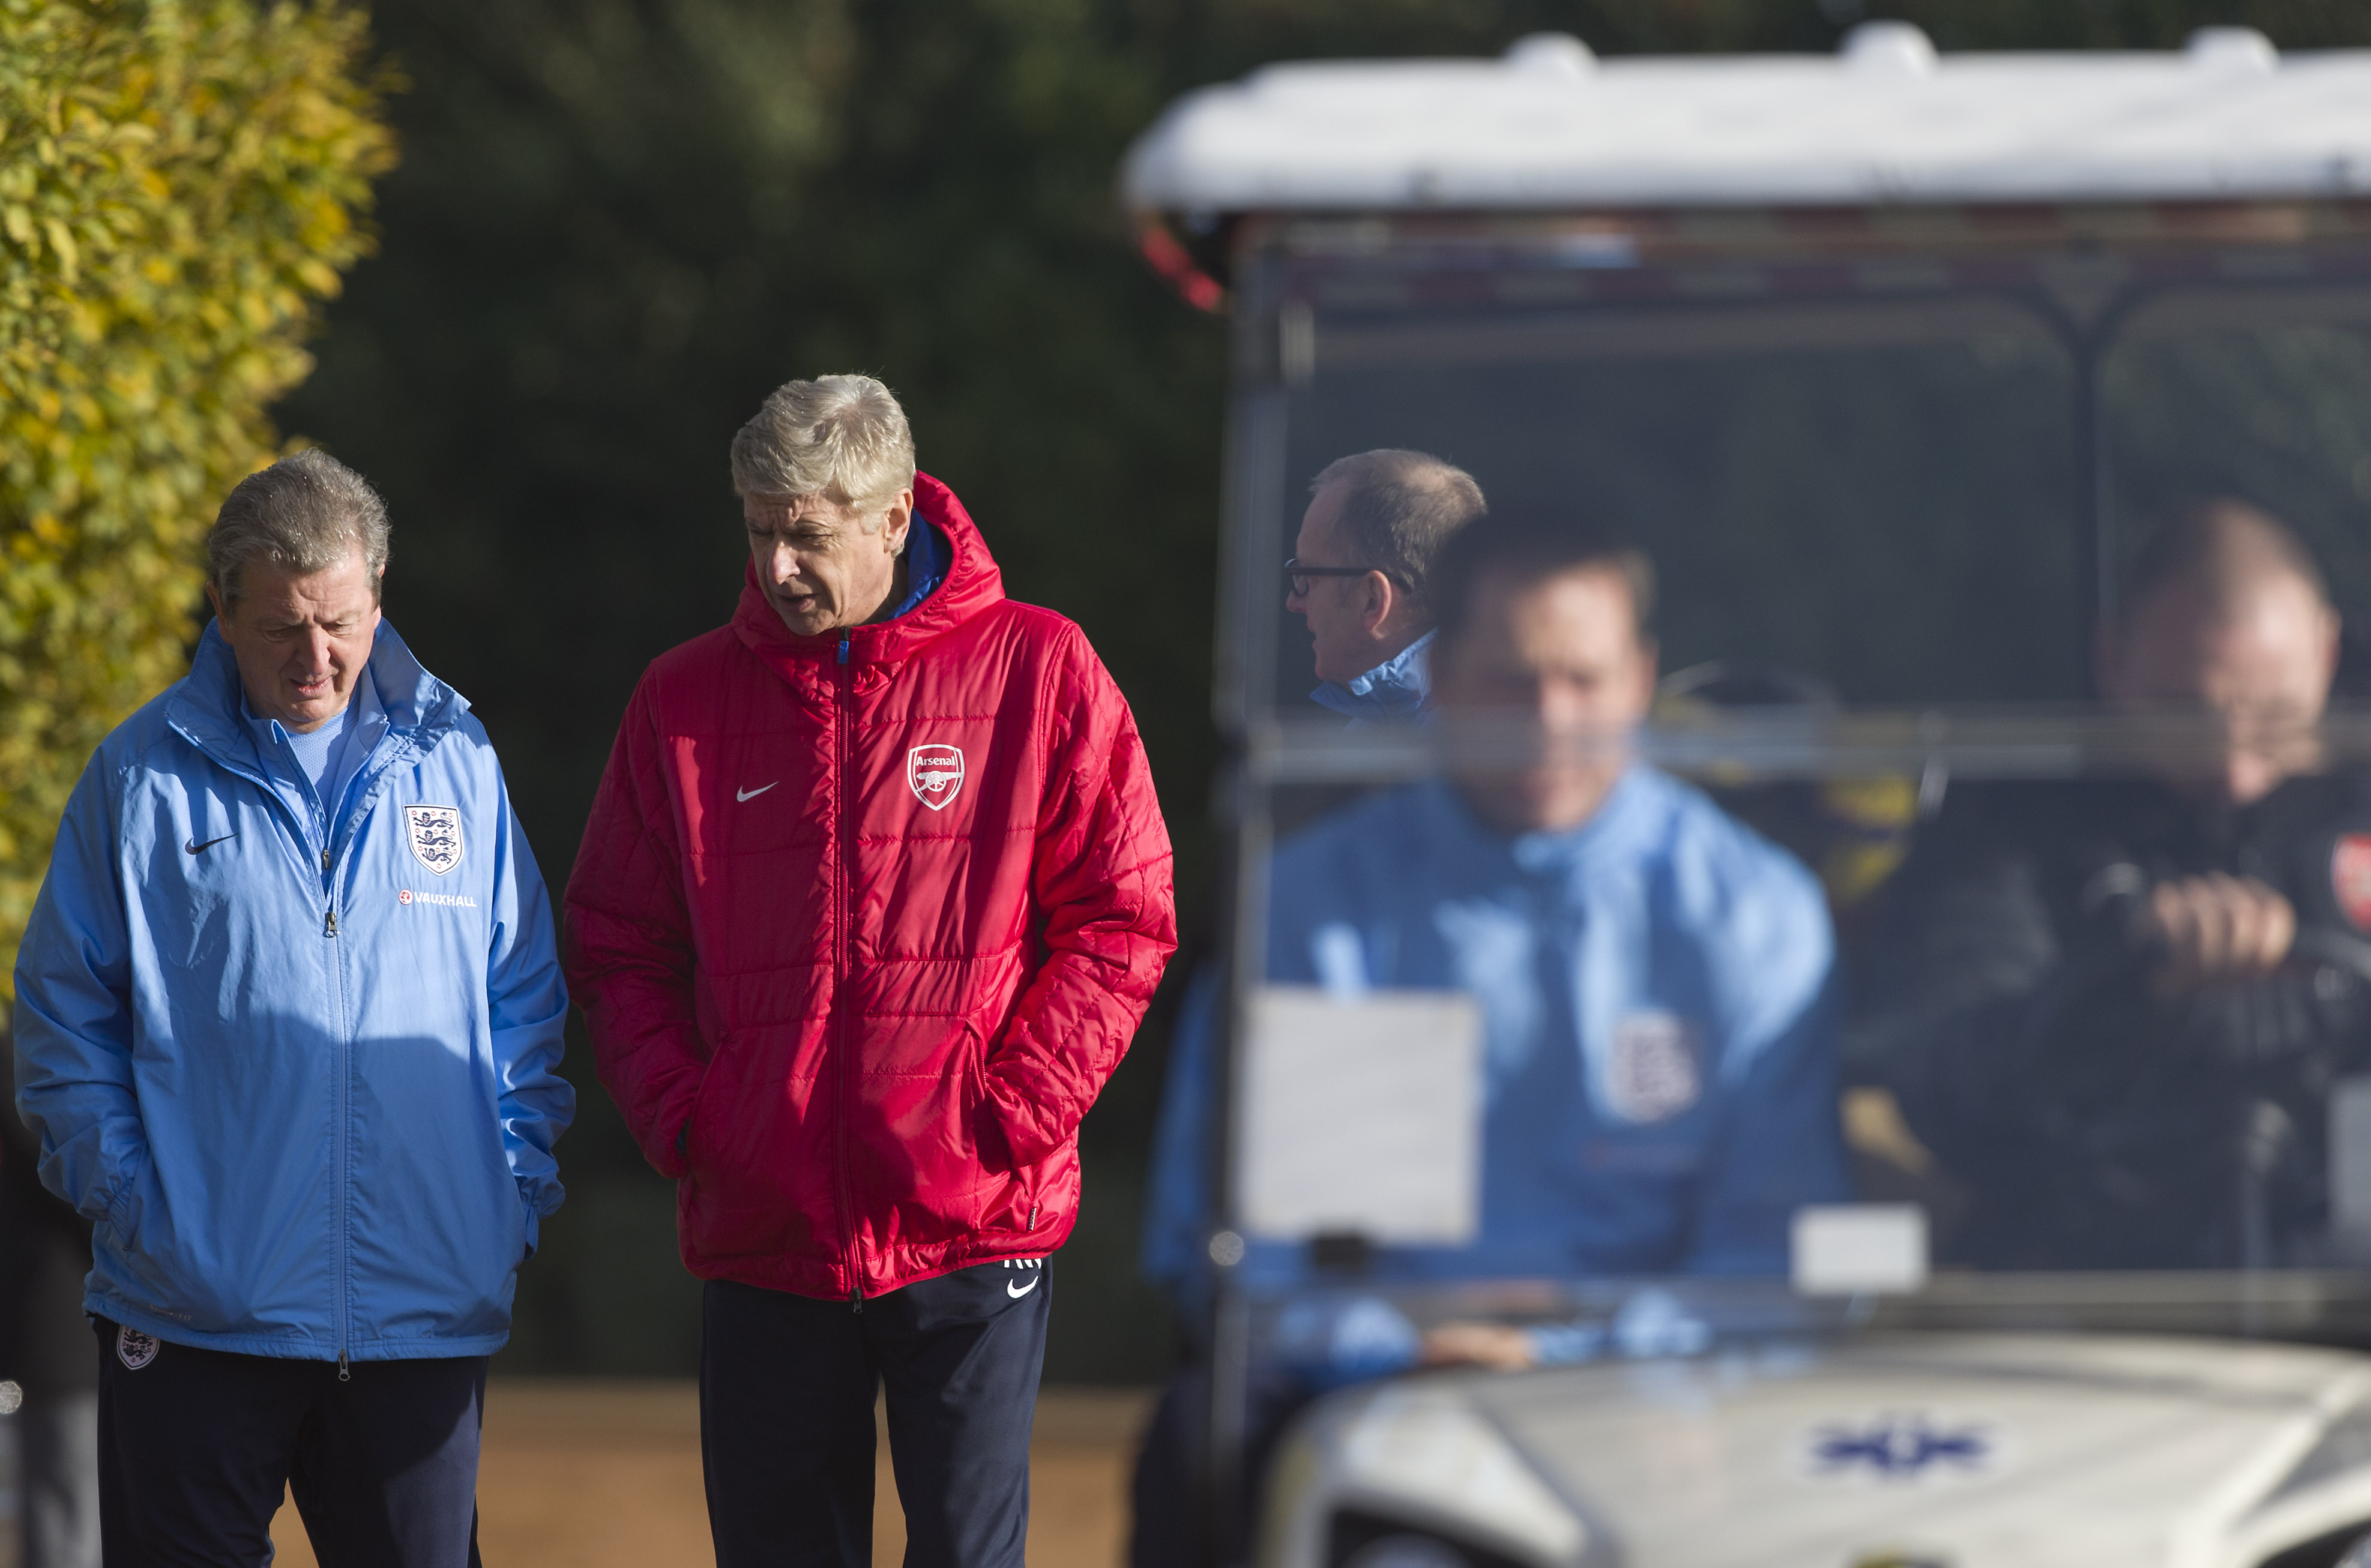 England manager Roy Hodgson (L) walk with Arsenal's French manager Arsene Wenger (R) ahead of an England training session at Arsenal's training ground, London Colney, north of London on November 13, 2013 ahead of their forthcoming international friendly football match against Chile.    AFP PHOTO / JUSTIN TALLIS - NOT FOR MARKETING OR ADVERTISING USE / RESTRICTED TO EDITORIAL USE        (Photo credit should read JUSTIN TALLIS/AFP/Getty Images)